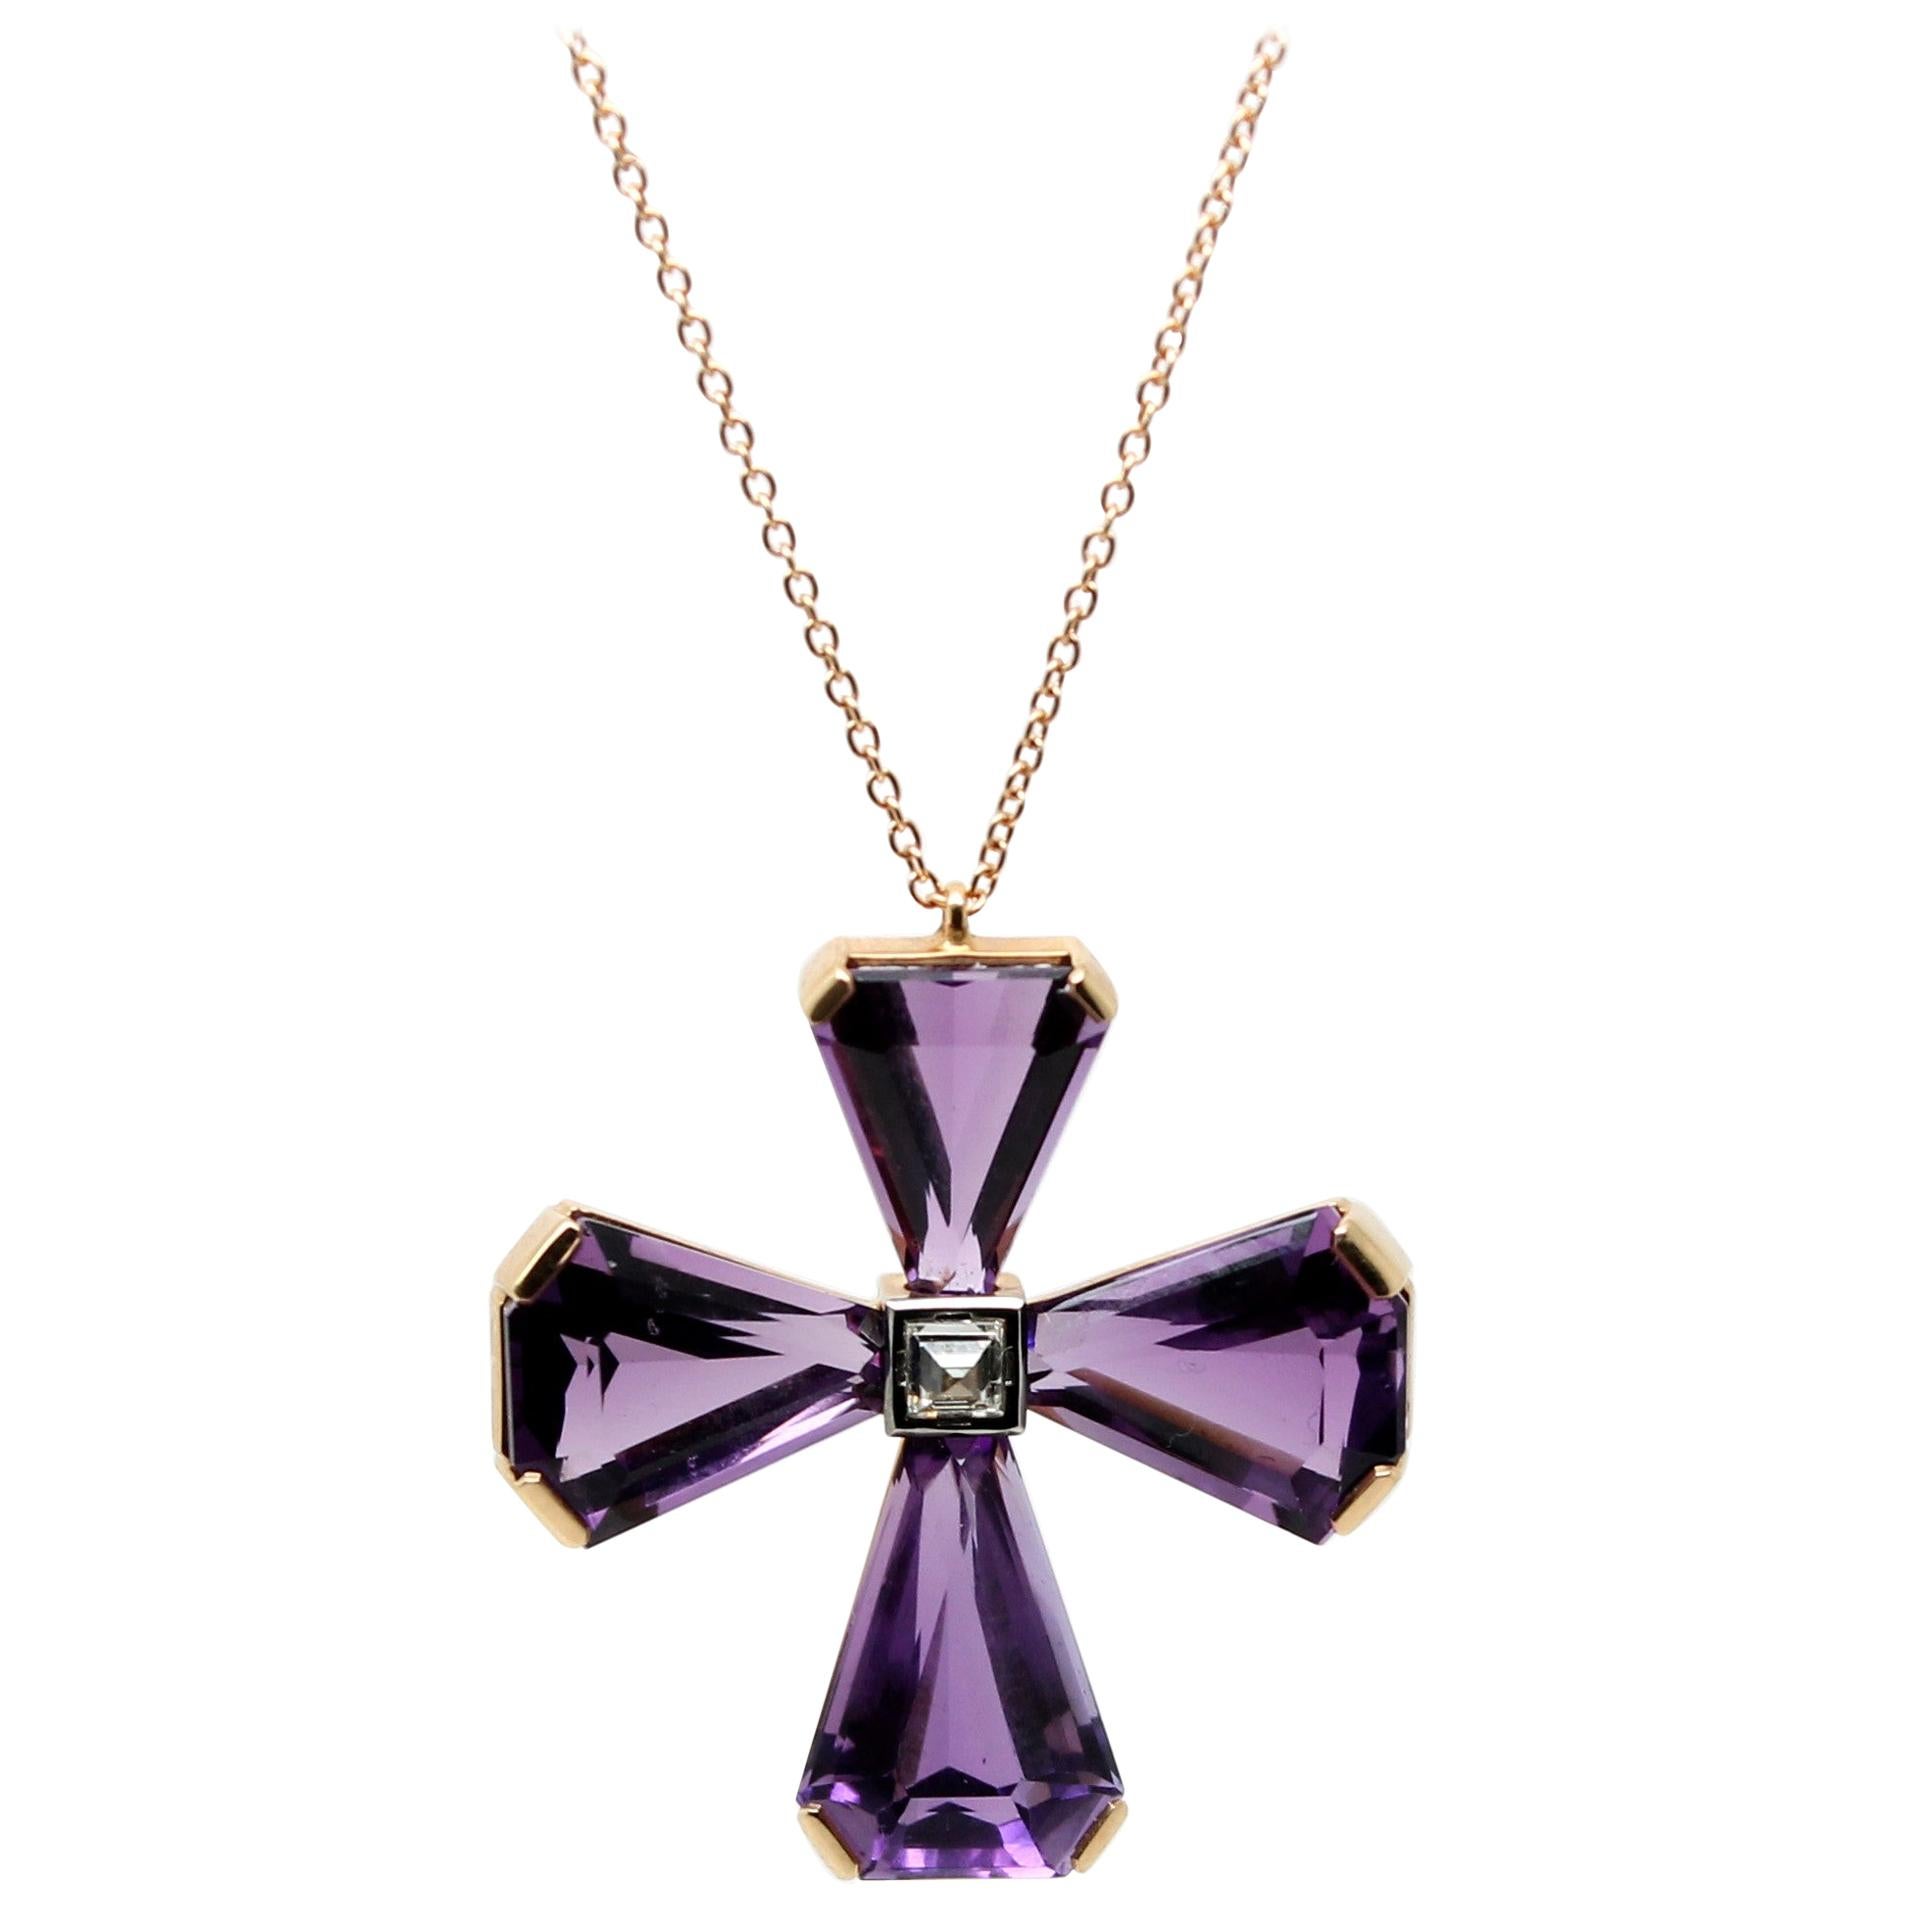 Elegant and Modern Amethyst Cross Pendant Necklace, Hand-Made in Italy, composed by 4 Purple Triangular Amethysts for 26.30 Carat total, with 1 Square Diamond in the centre of 0.36 Carat. The Center White Diamond is set upsidedown to better catch